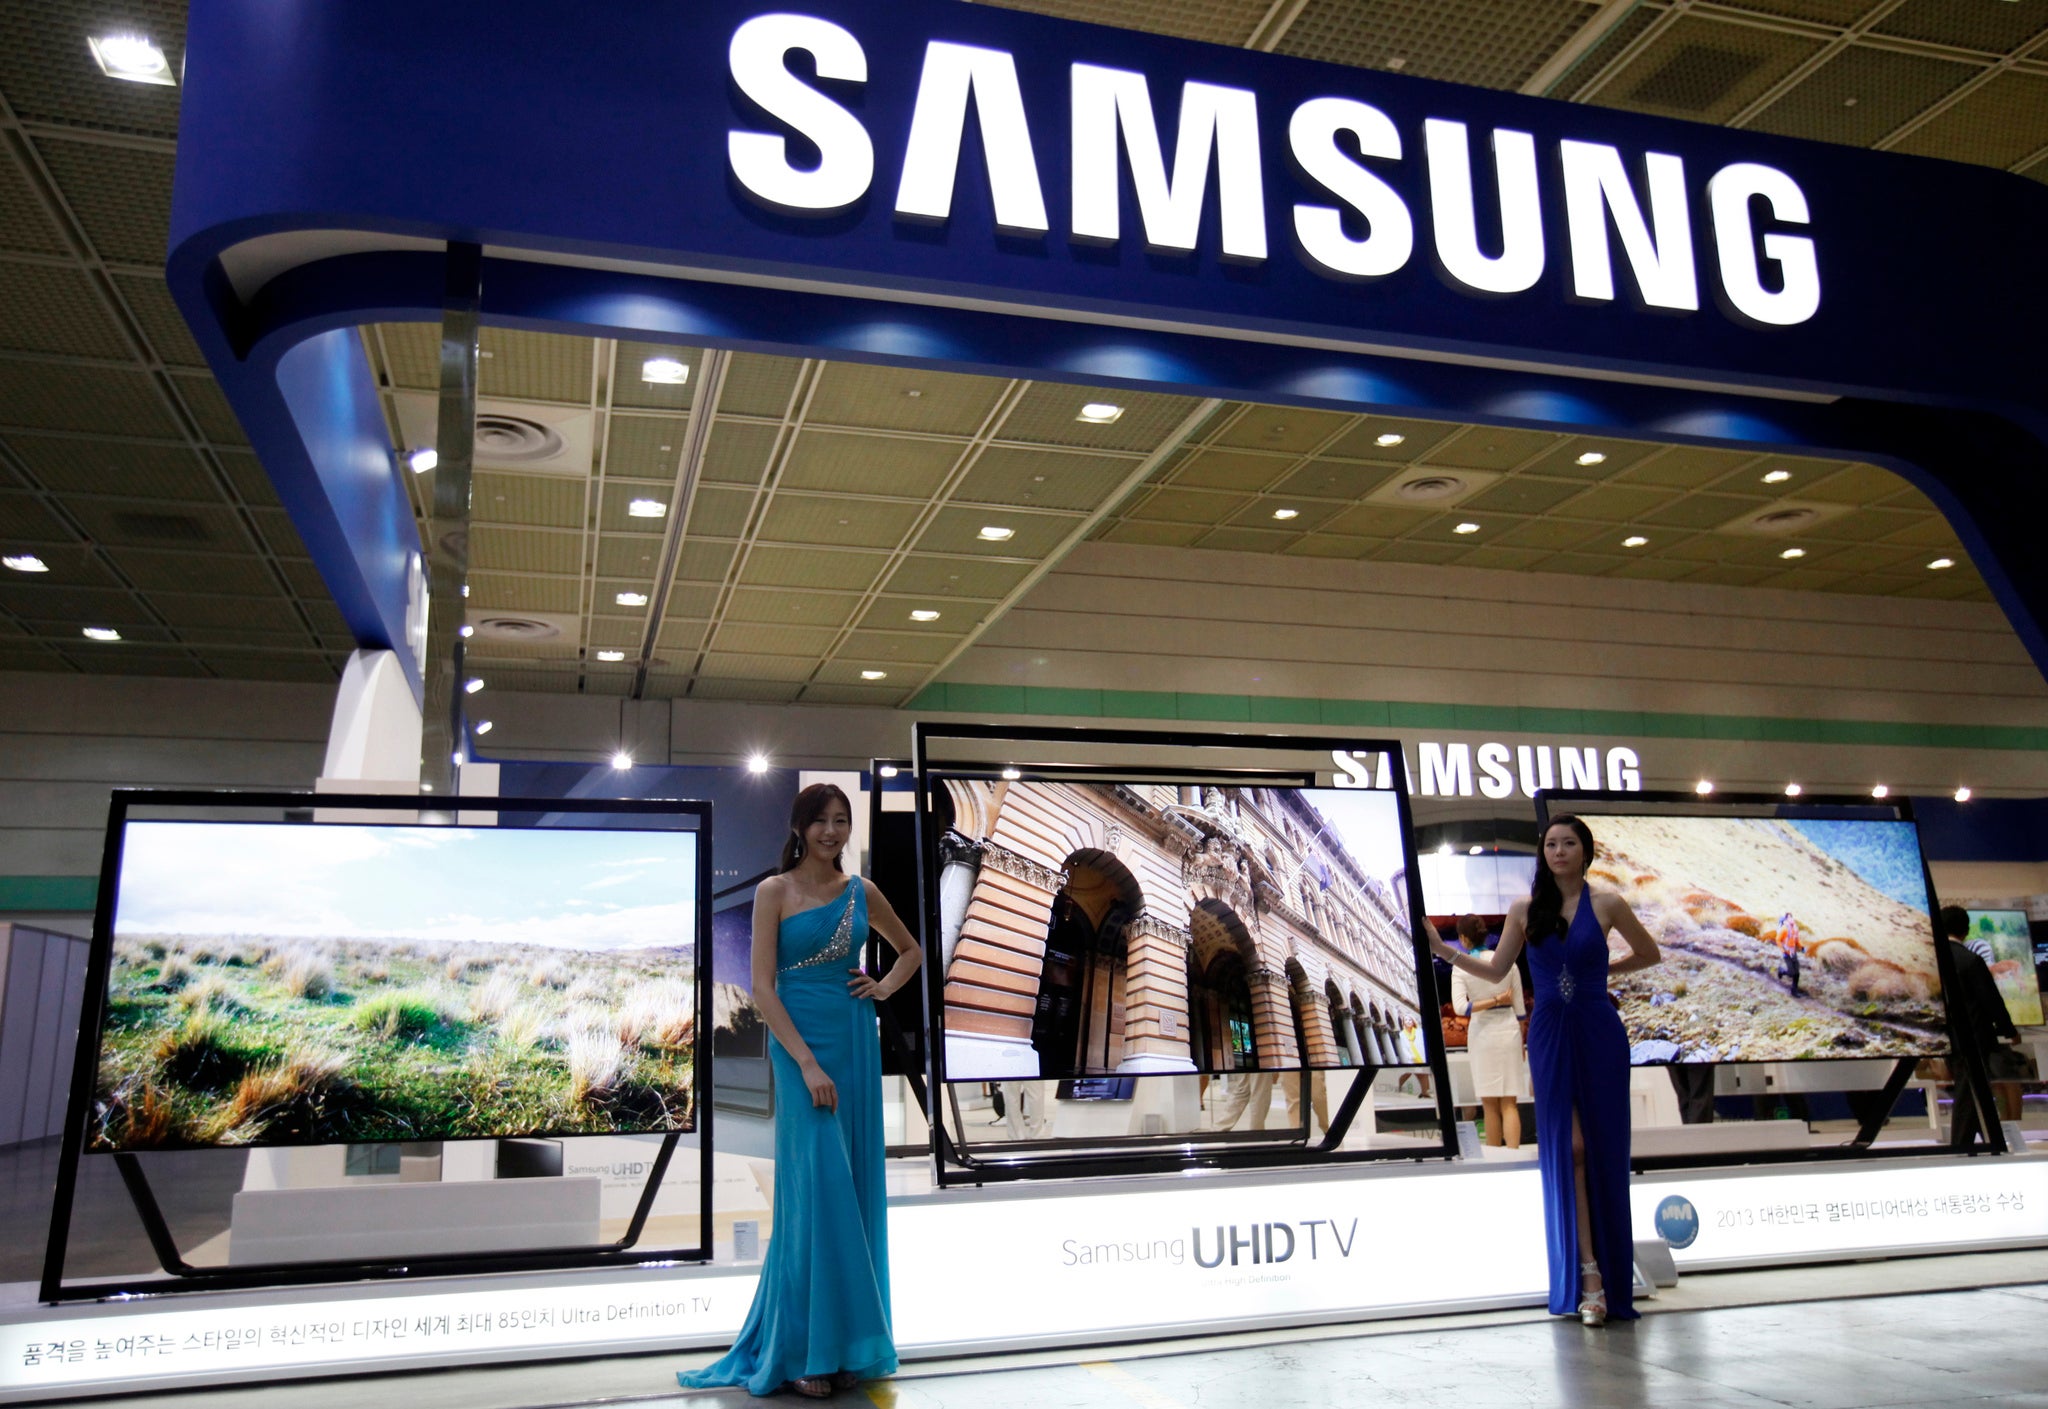 Models pose with Samsung Electronics' Ultra HD LCD televisions during World IT show 2013 at the Coex convention centre in Seoul May 22, 2013. World IT Show (WIS) 2013, Korea’s largest IT trade show, opened on Tuesday. REUTERS/Kim Hong-Ji